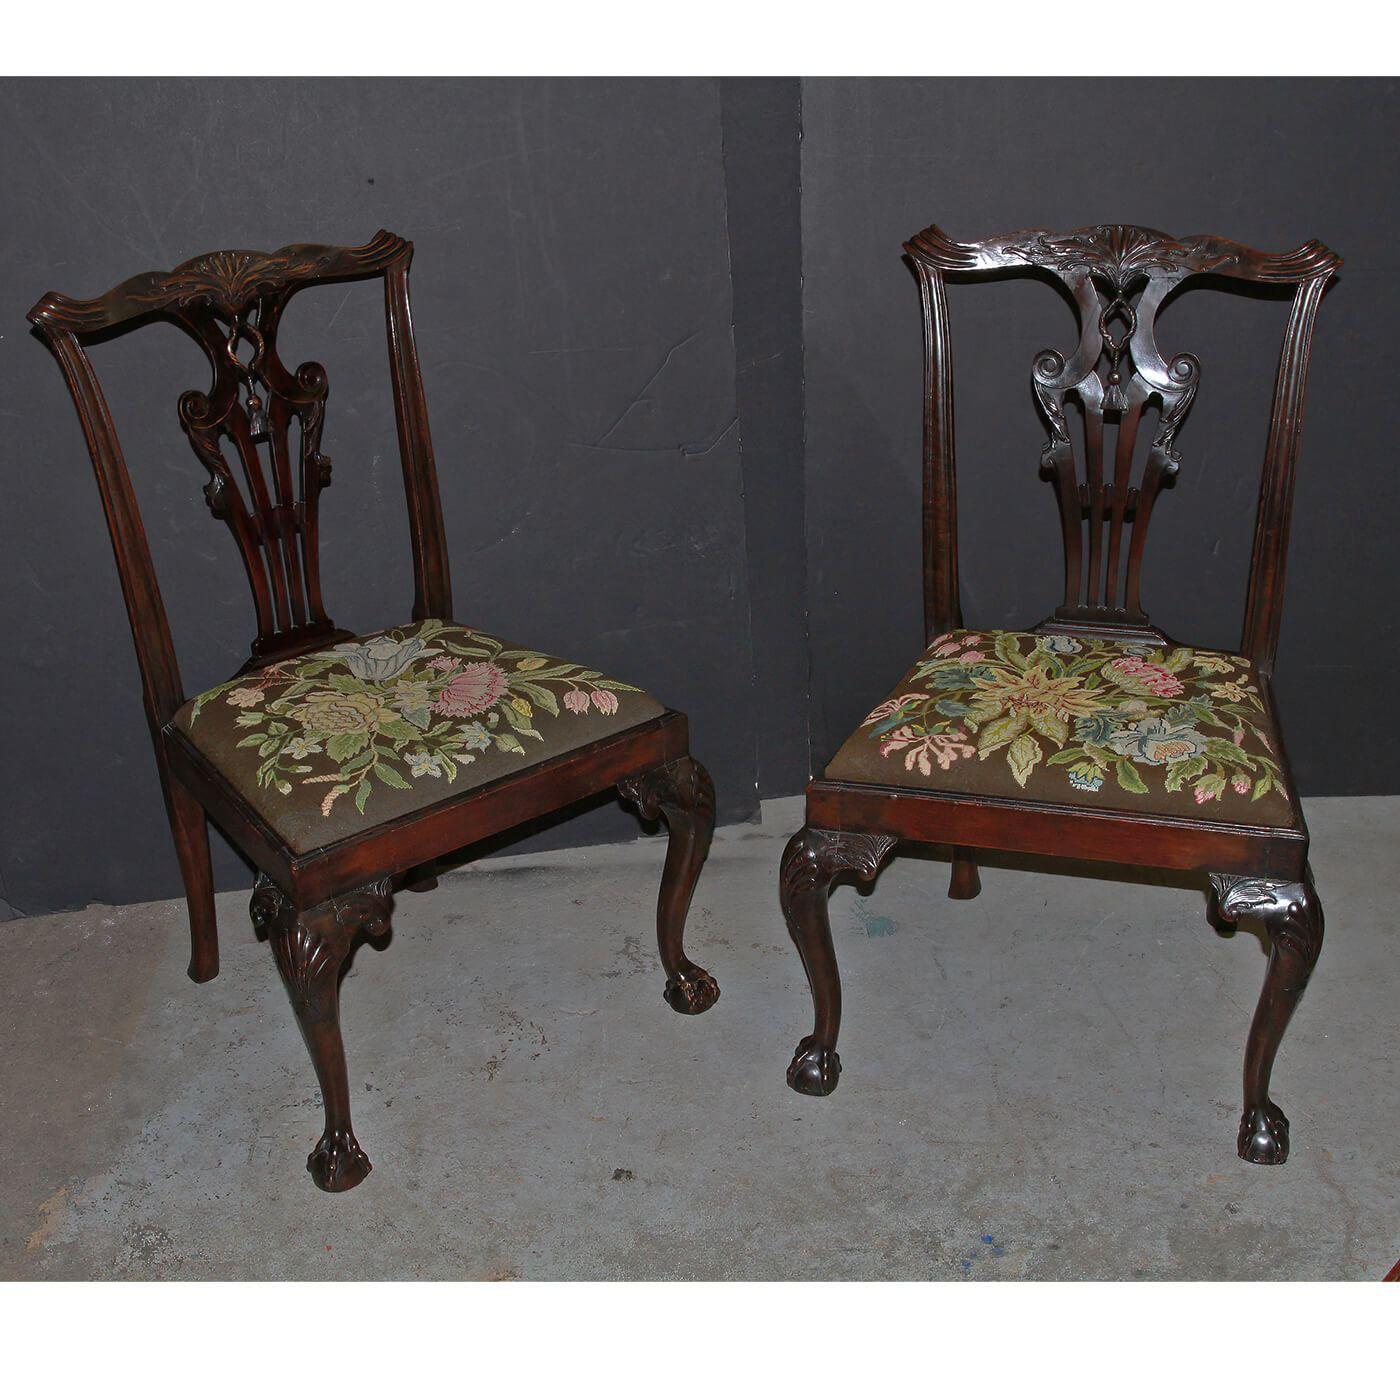 A pair of George II Chippendale carved mahogany side chairs, with a shell carved and scroll eared crest rail, rare tassel and rope motif carved splat, shell carved knees, and ball and claw feet. English, Ca 1760's.

Dimensions: 22